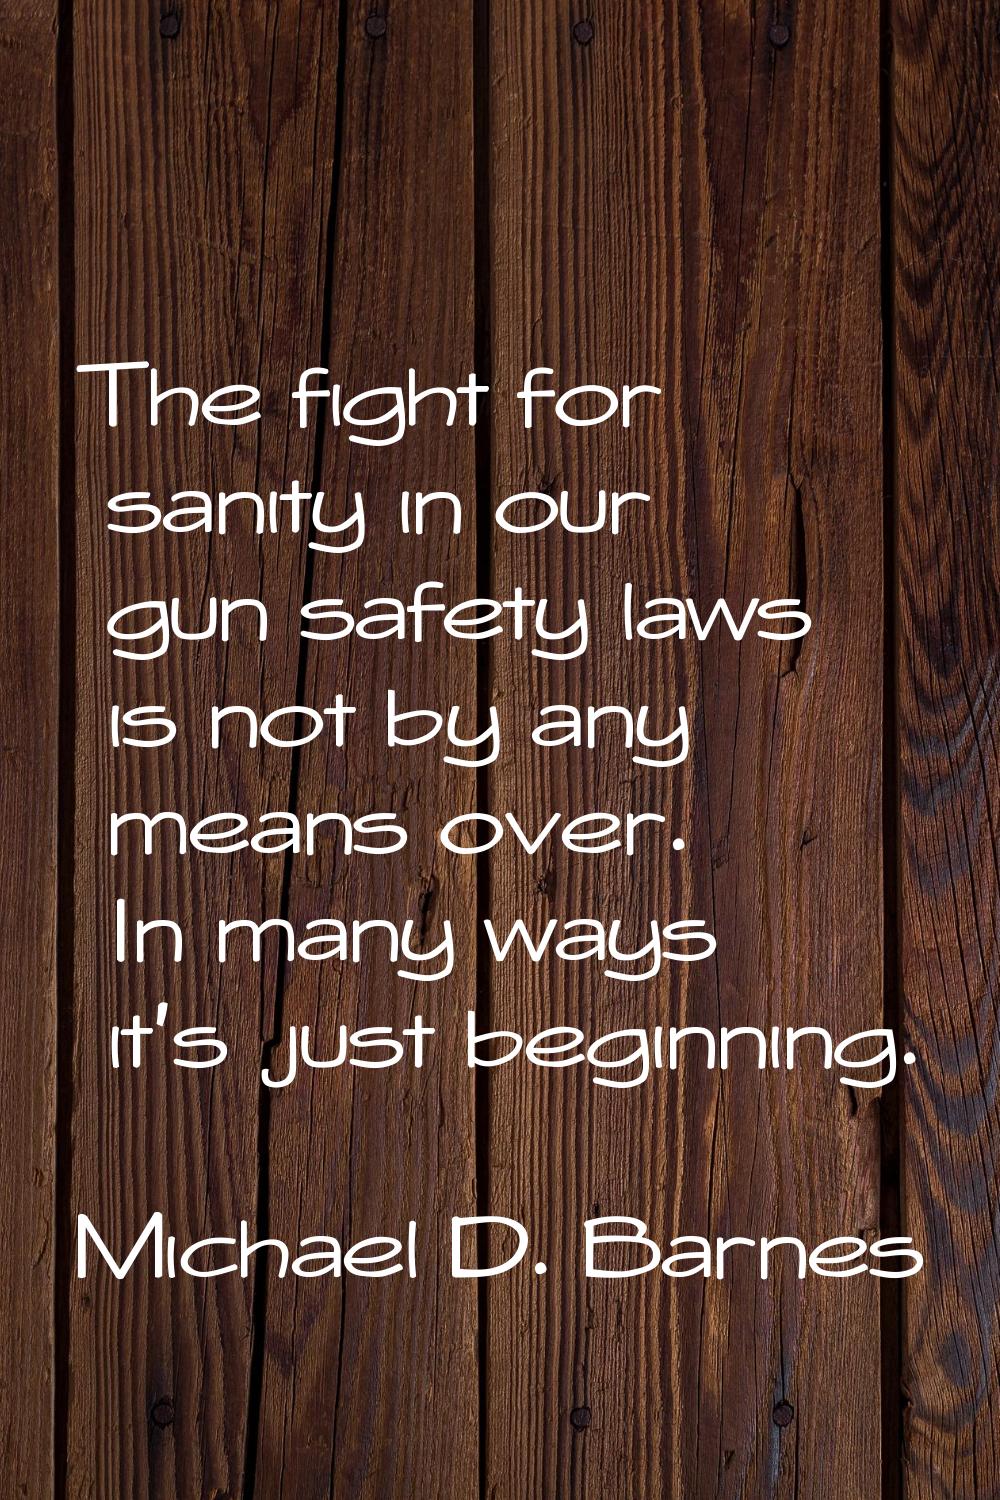 The fight for sanity in our gun safety laws is not by any means over. In many ways it's just beginn